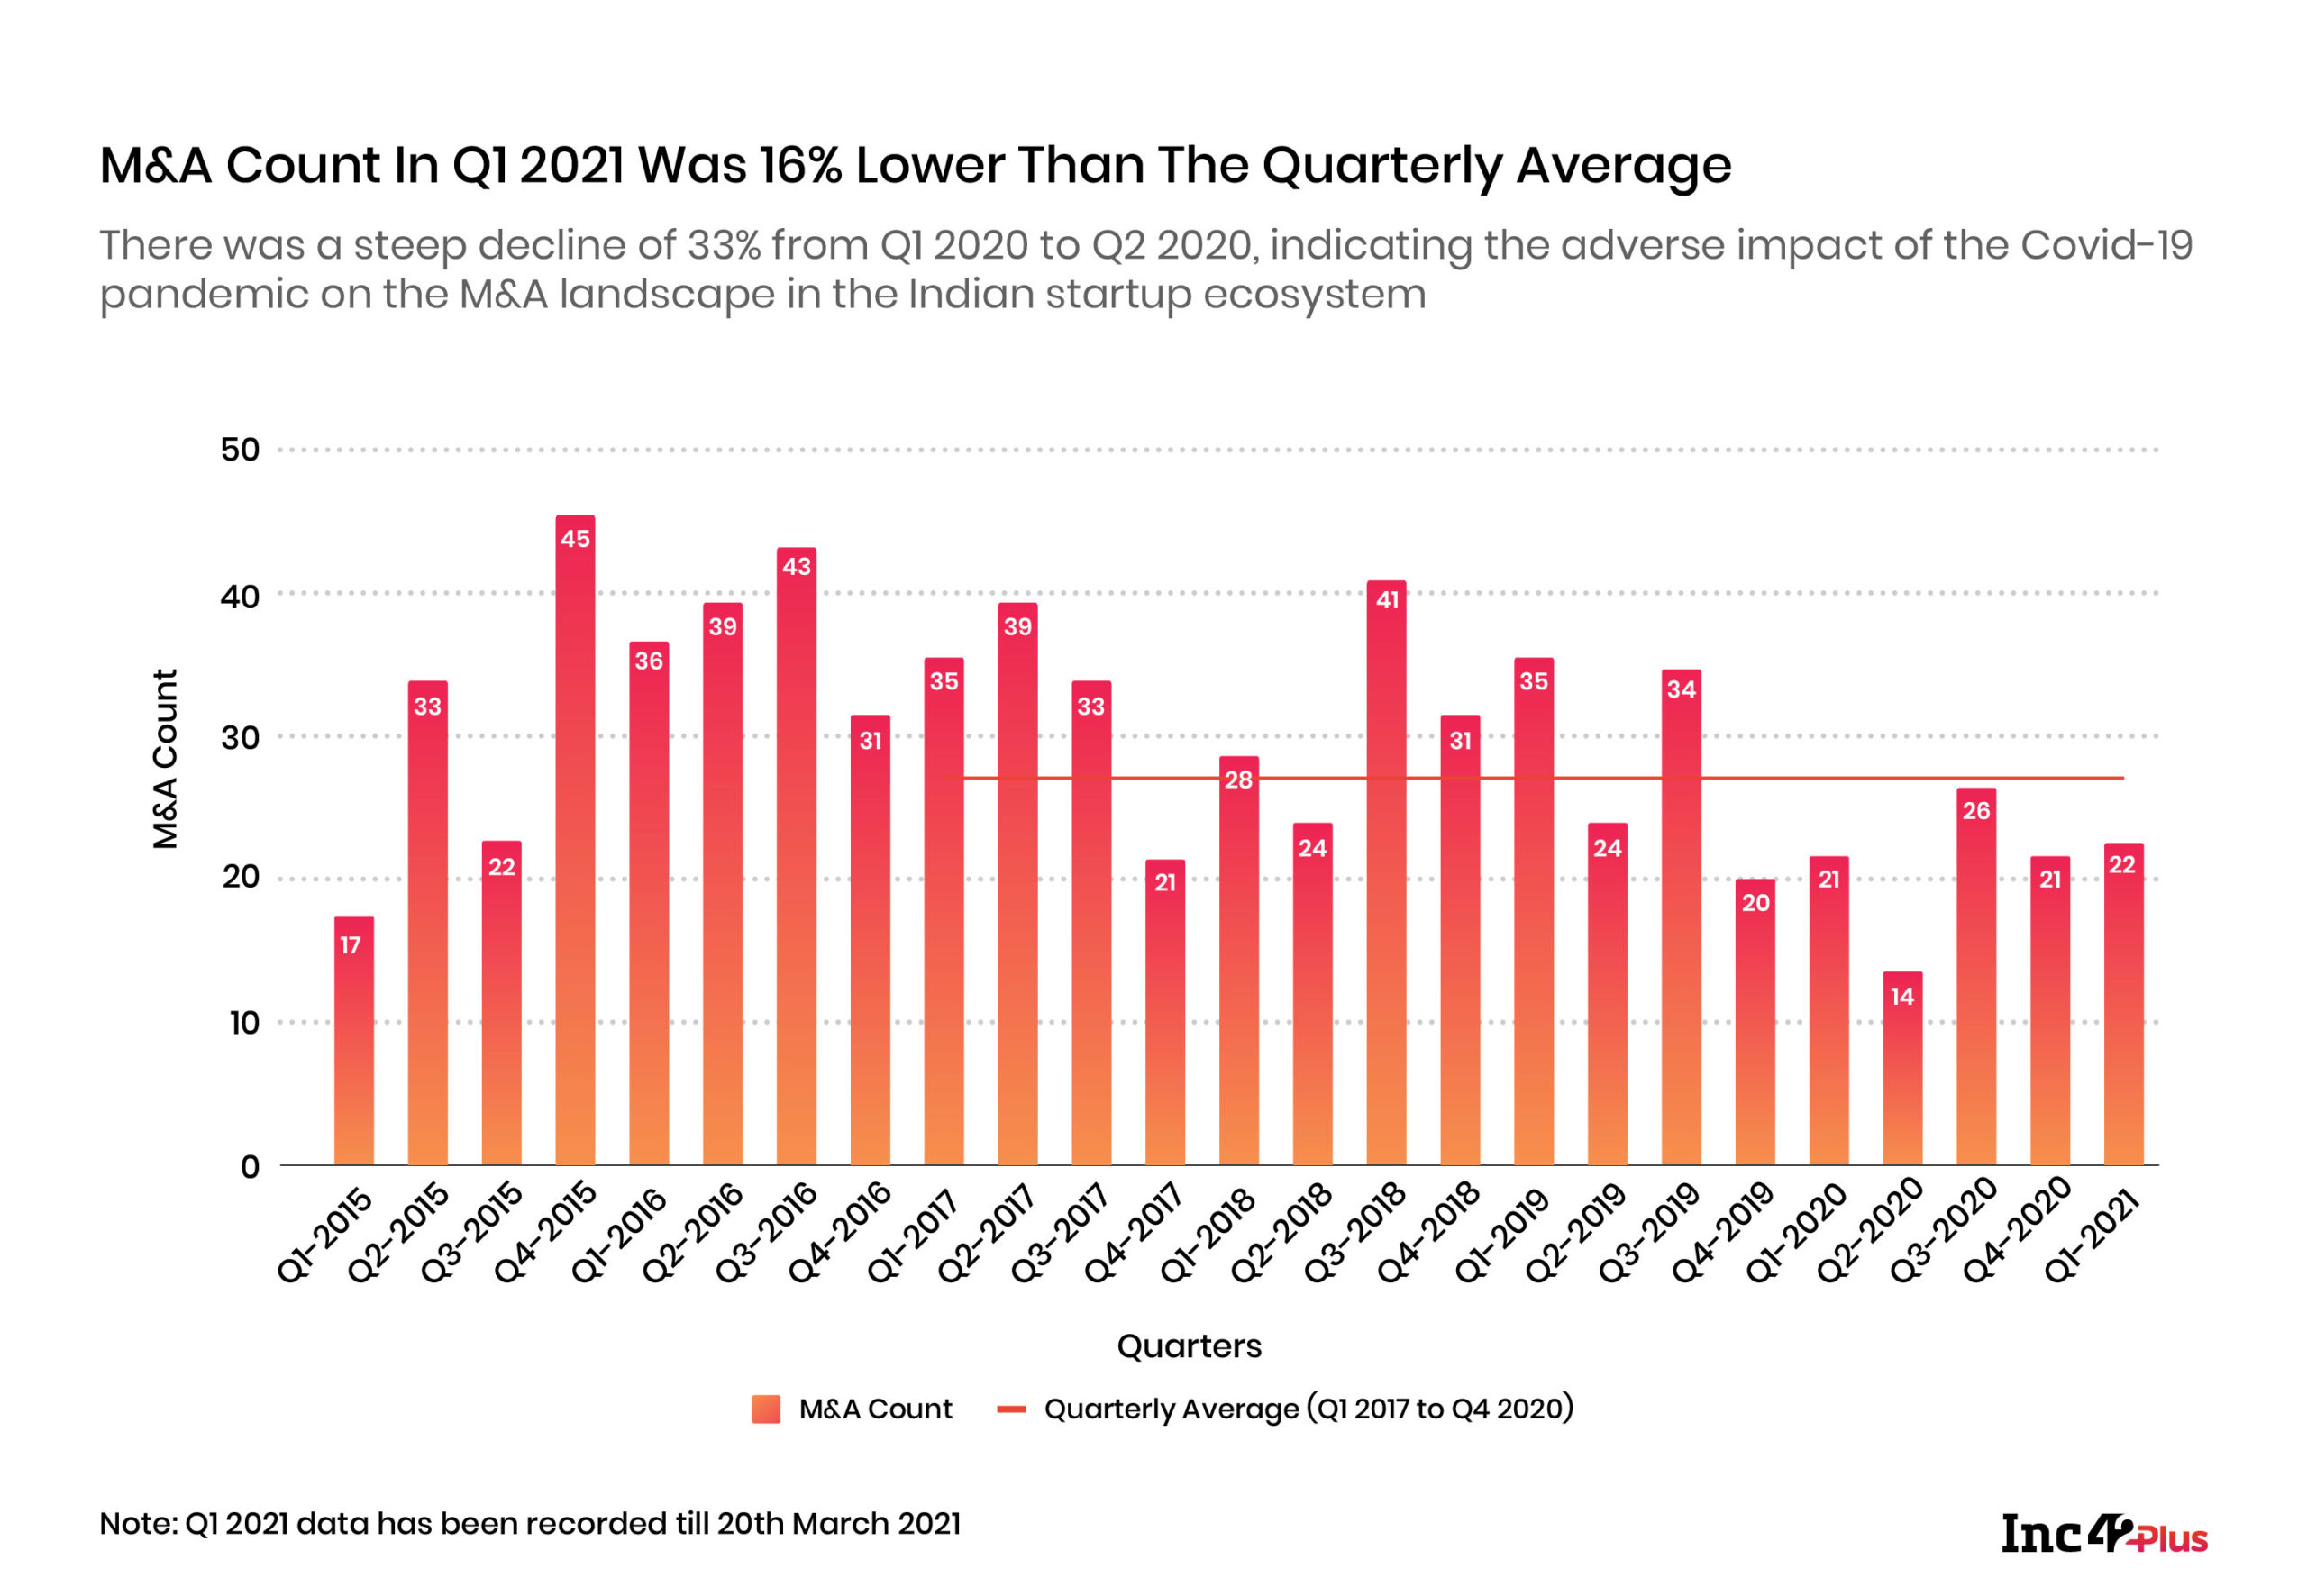 M&A Count In Q1 2021 Was 16% Lower Than The Quarterly Average